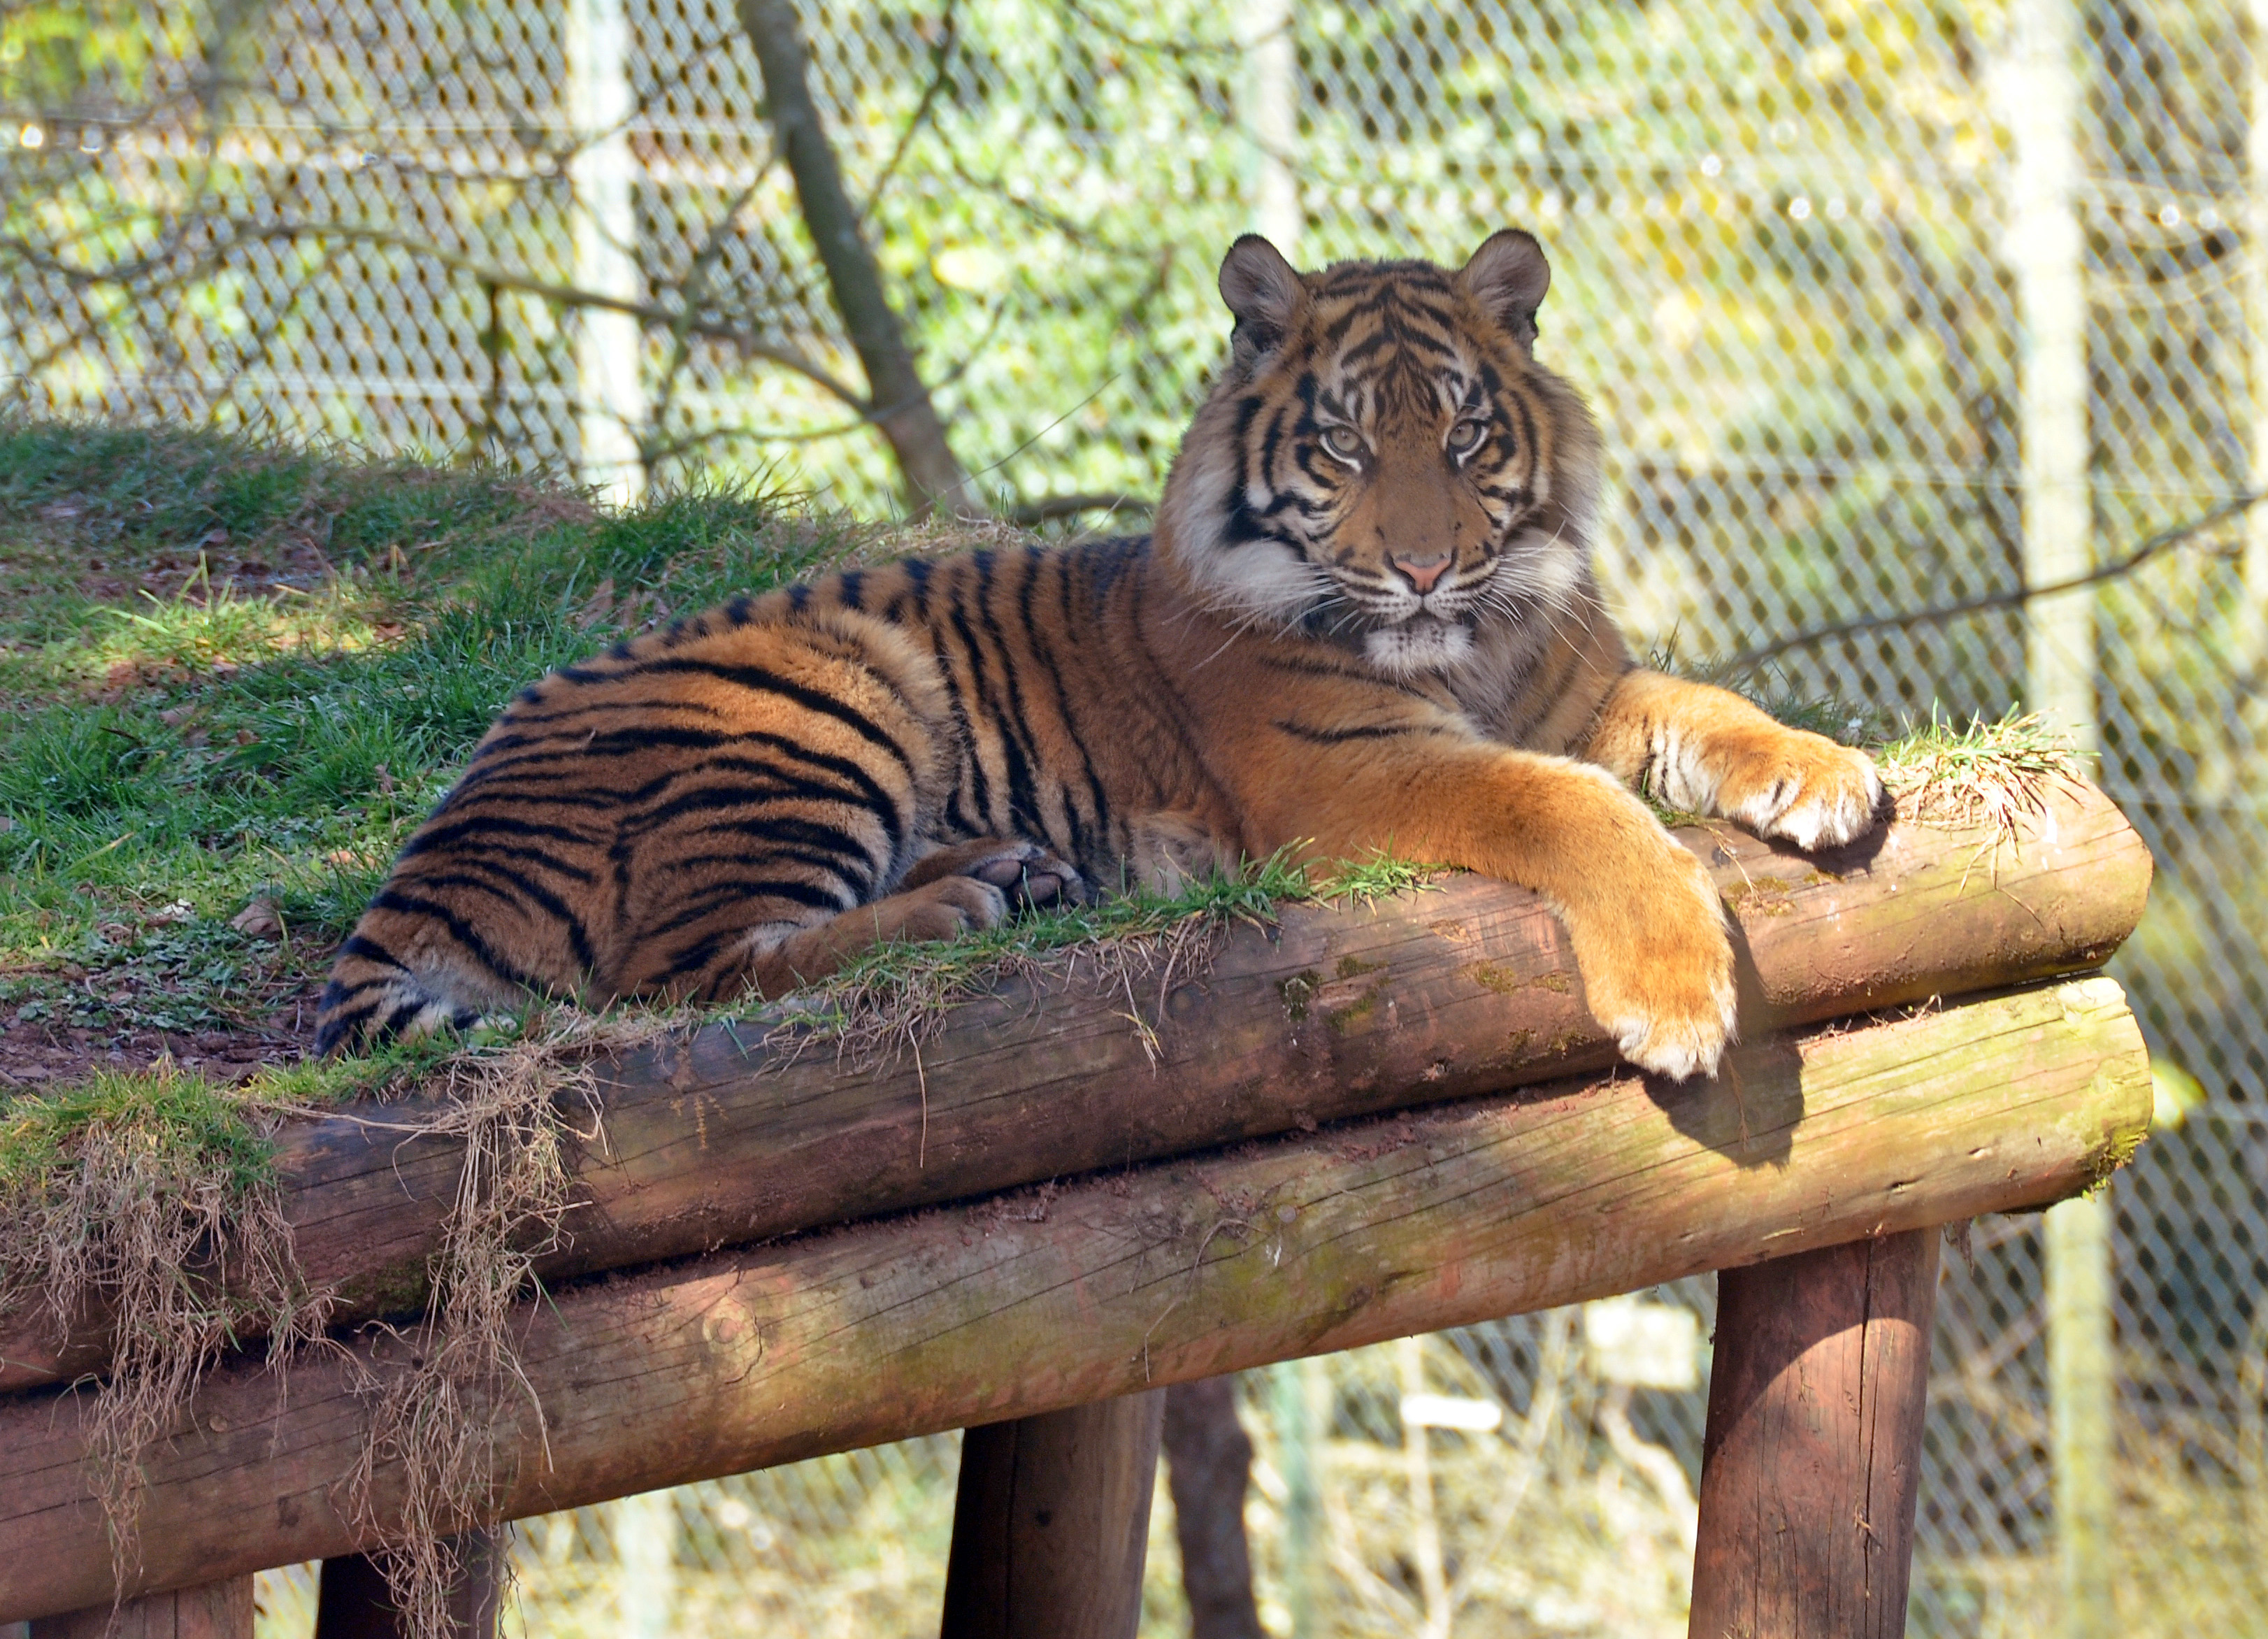 CSR: The Pros And Cons Of Zoos - The CSR Journal